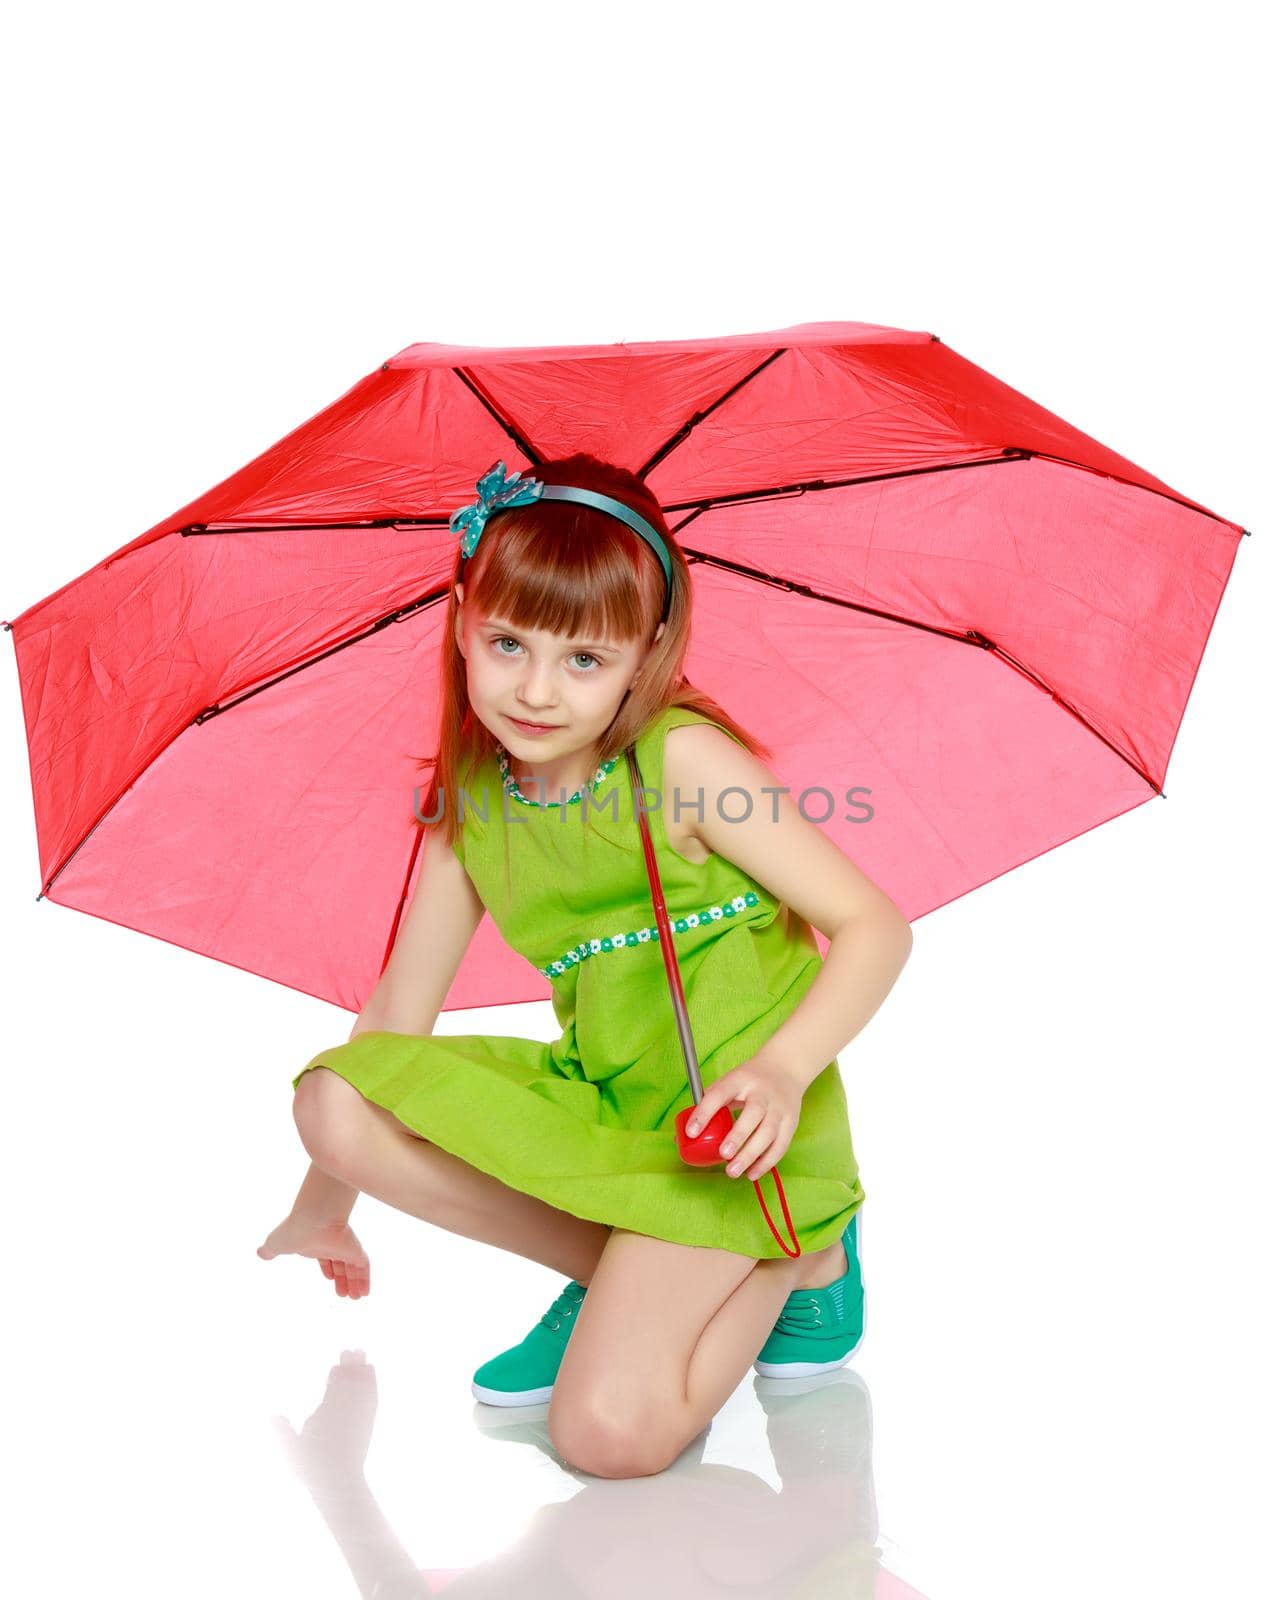 A little girl with long blond hair and a short bangs, in a short summer dress.The girl closed from the sun and rain under a red umbrella.